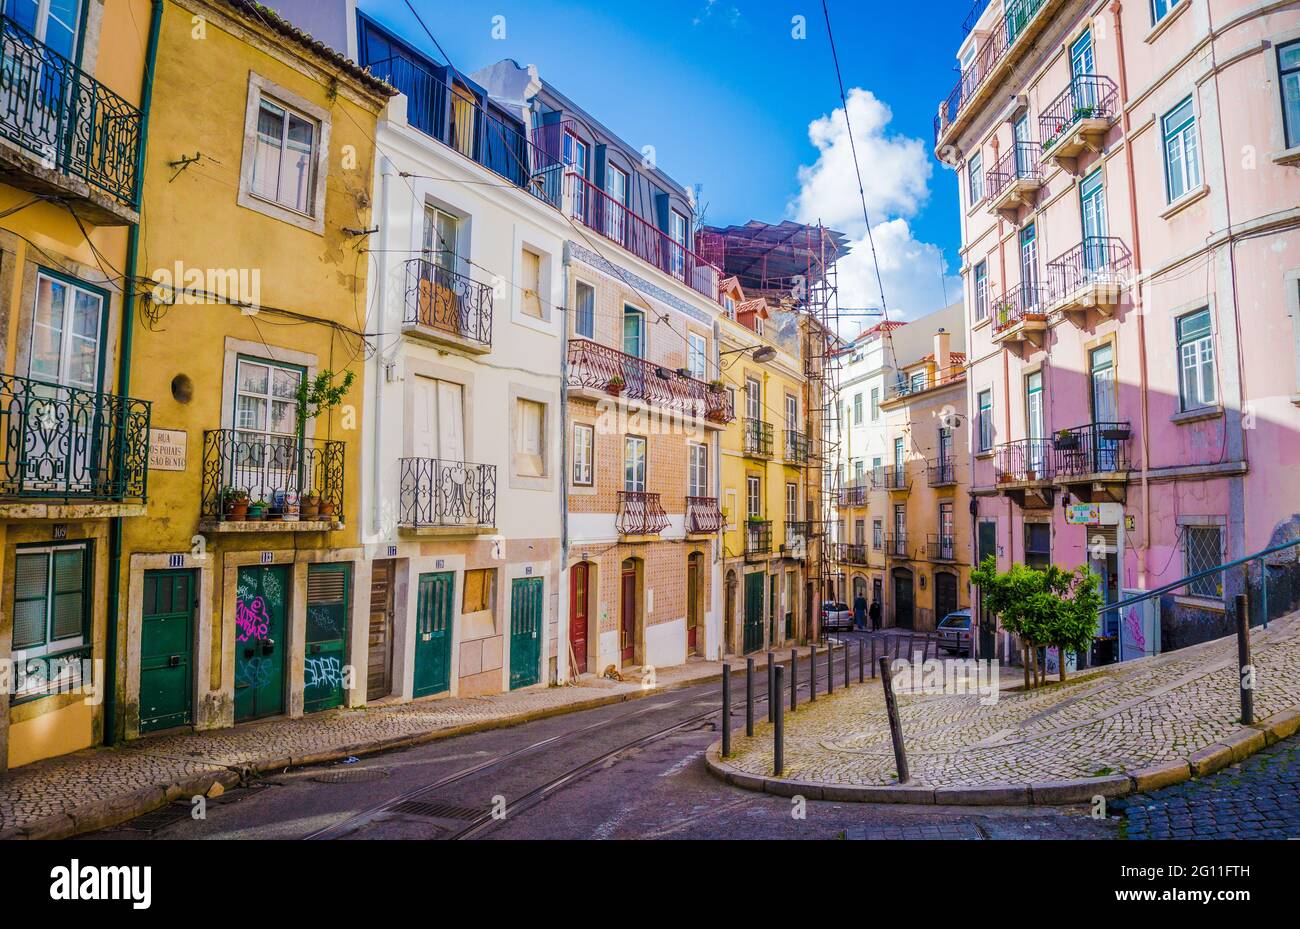 Rua Poiais de Sao Bento street with tram line in Lisbon. Typical streets with colorful buildings with no people, Portugal Stock Photo